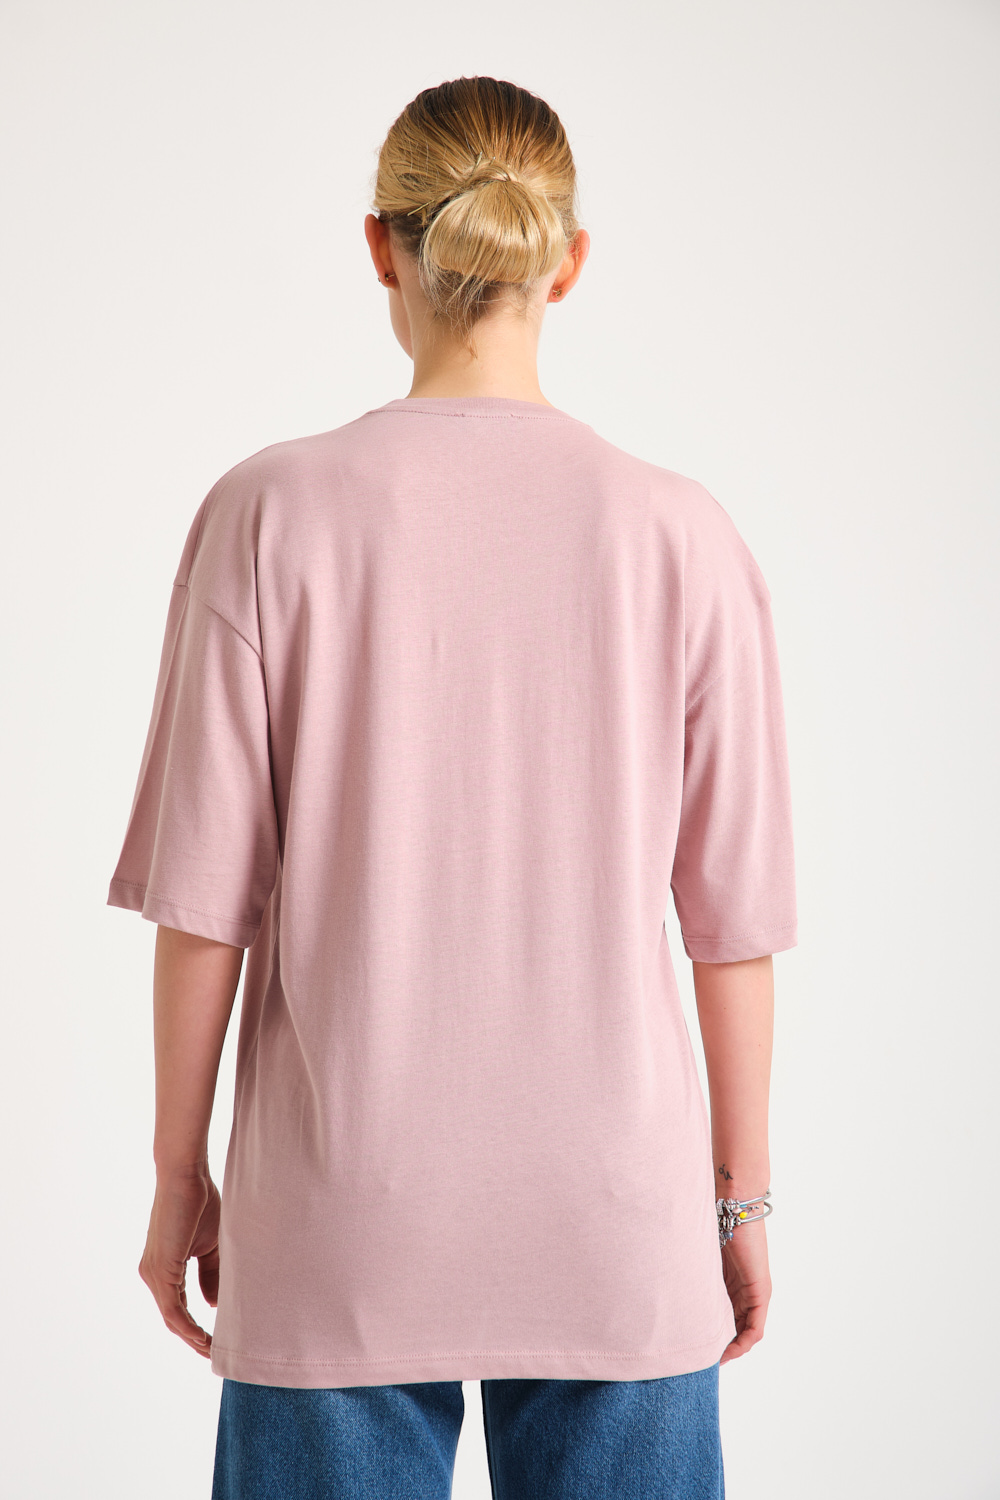 Crew Neck Crystal Printed Dusty Rose T-Shirt